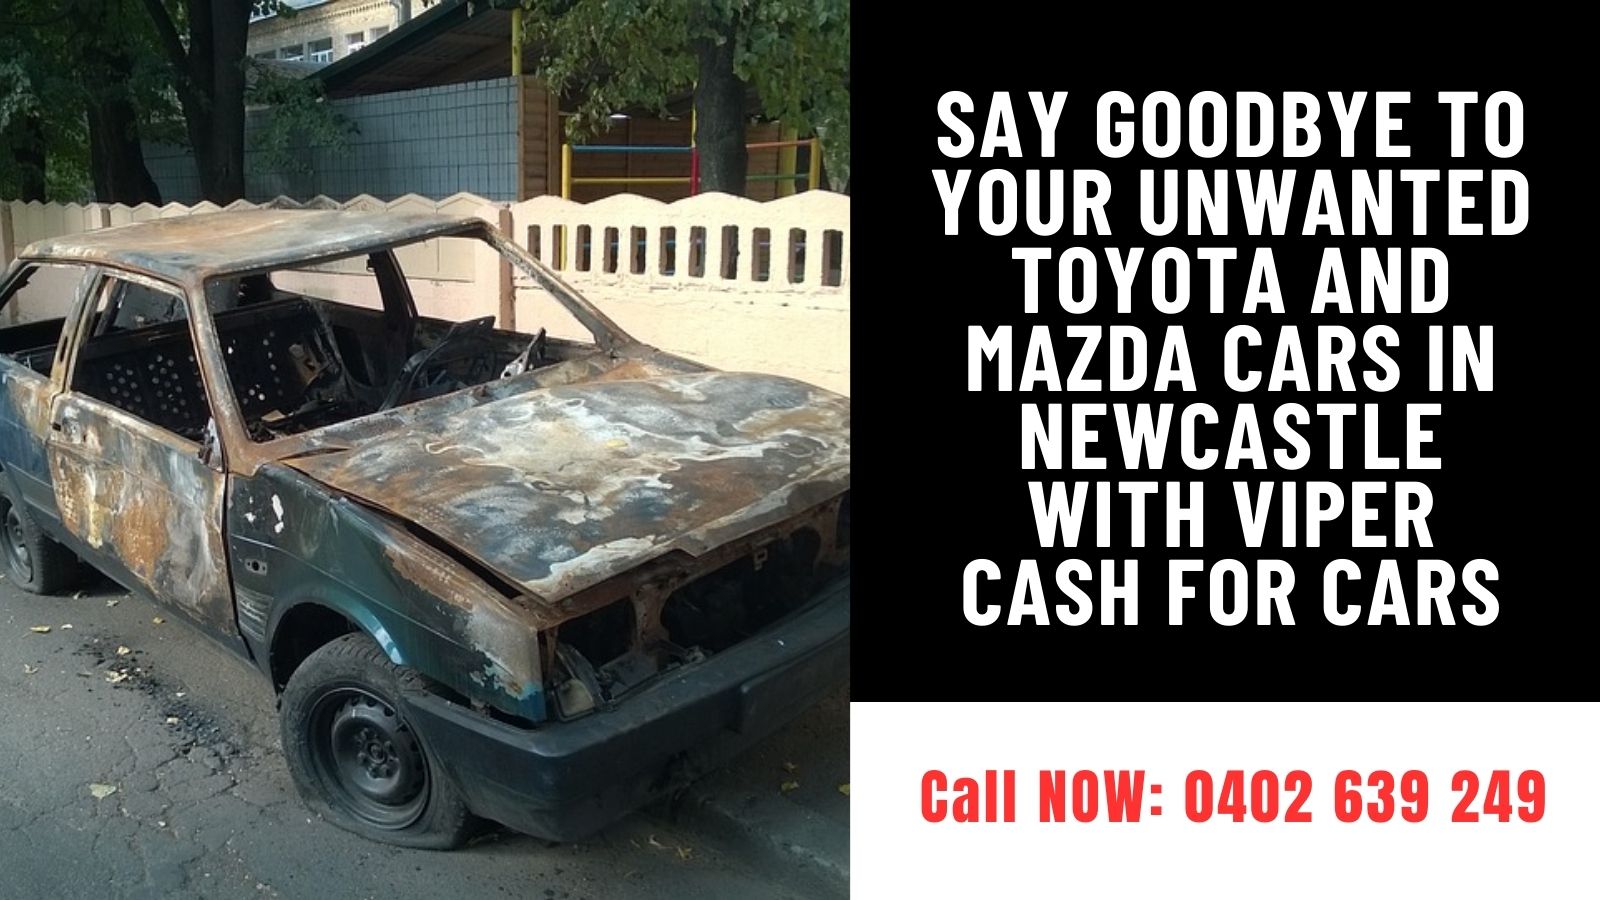 Say Goodbye to Your Unwanted Toyota and Mazda Cars in Newcastle with Viper Cash For Cars